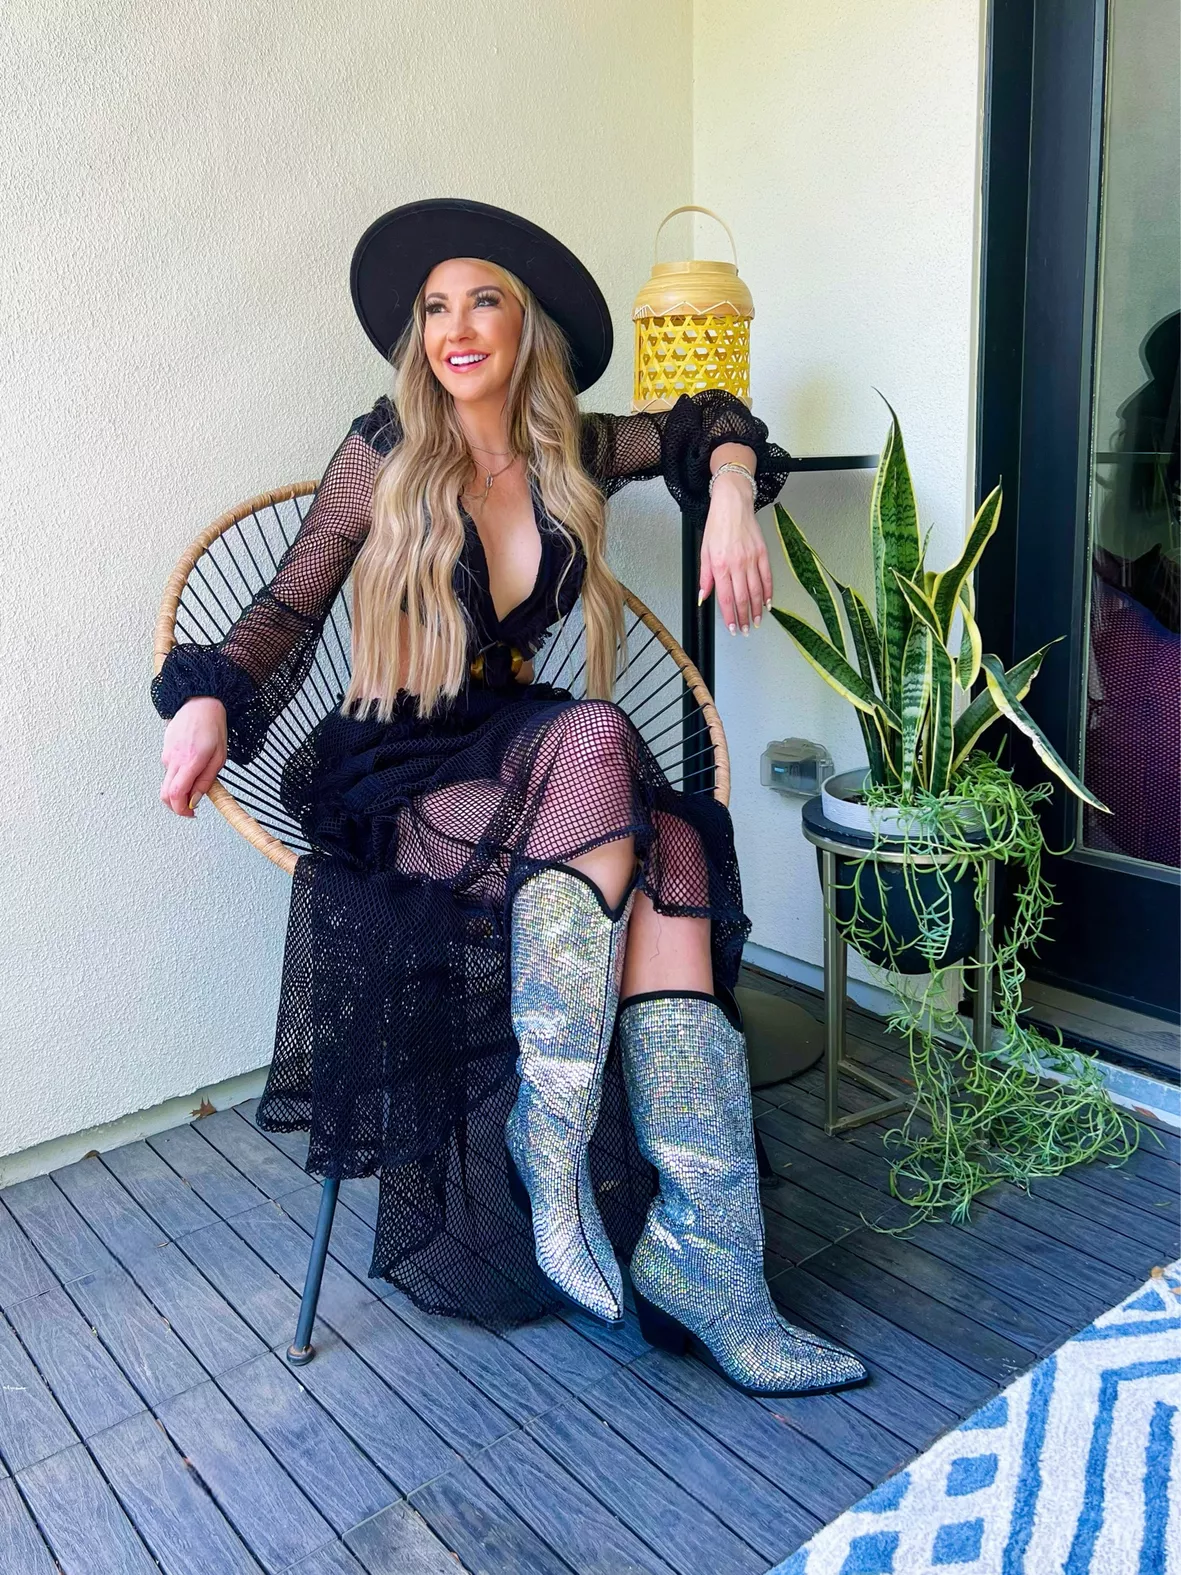 How to Style Cowboy Boots for Real Life, Not Coachella